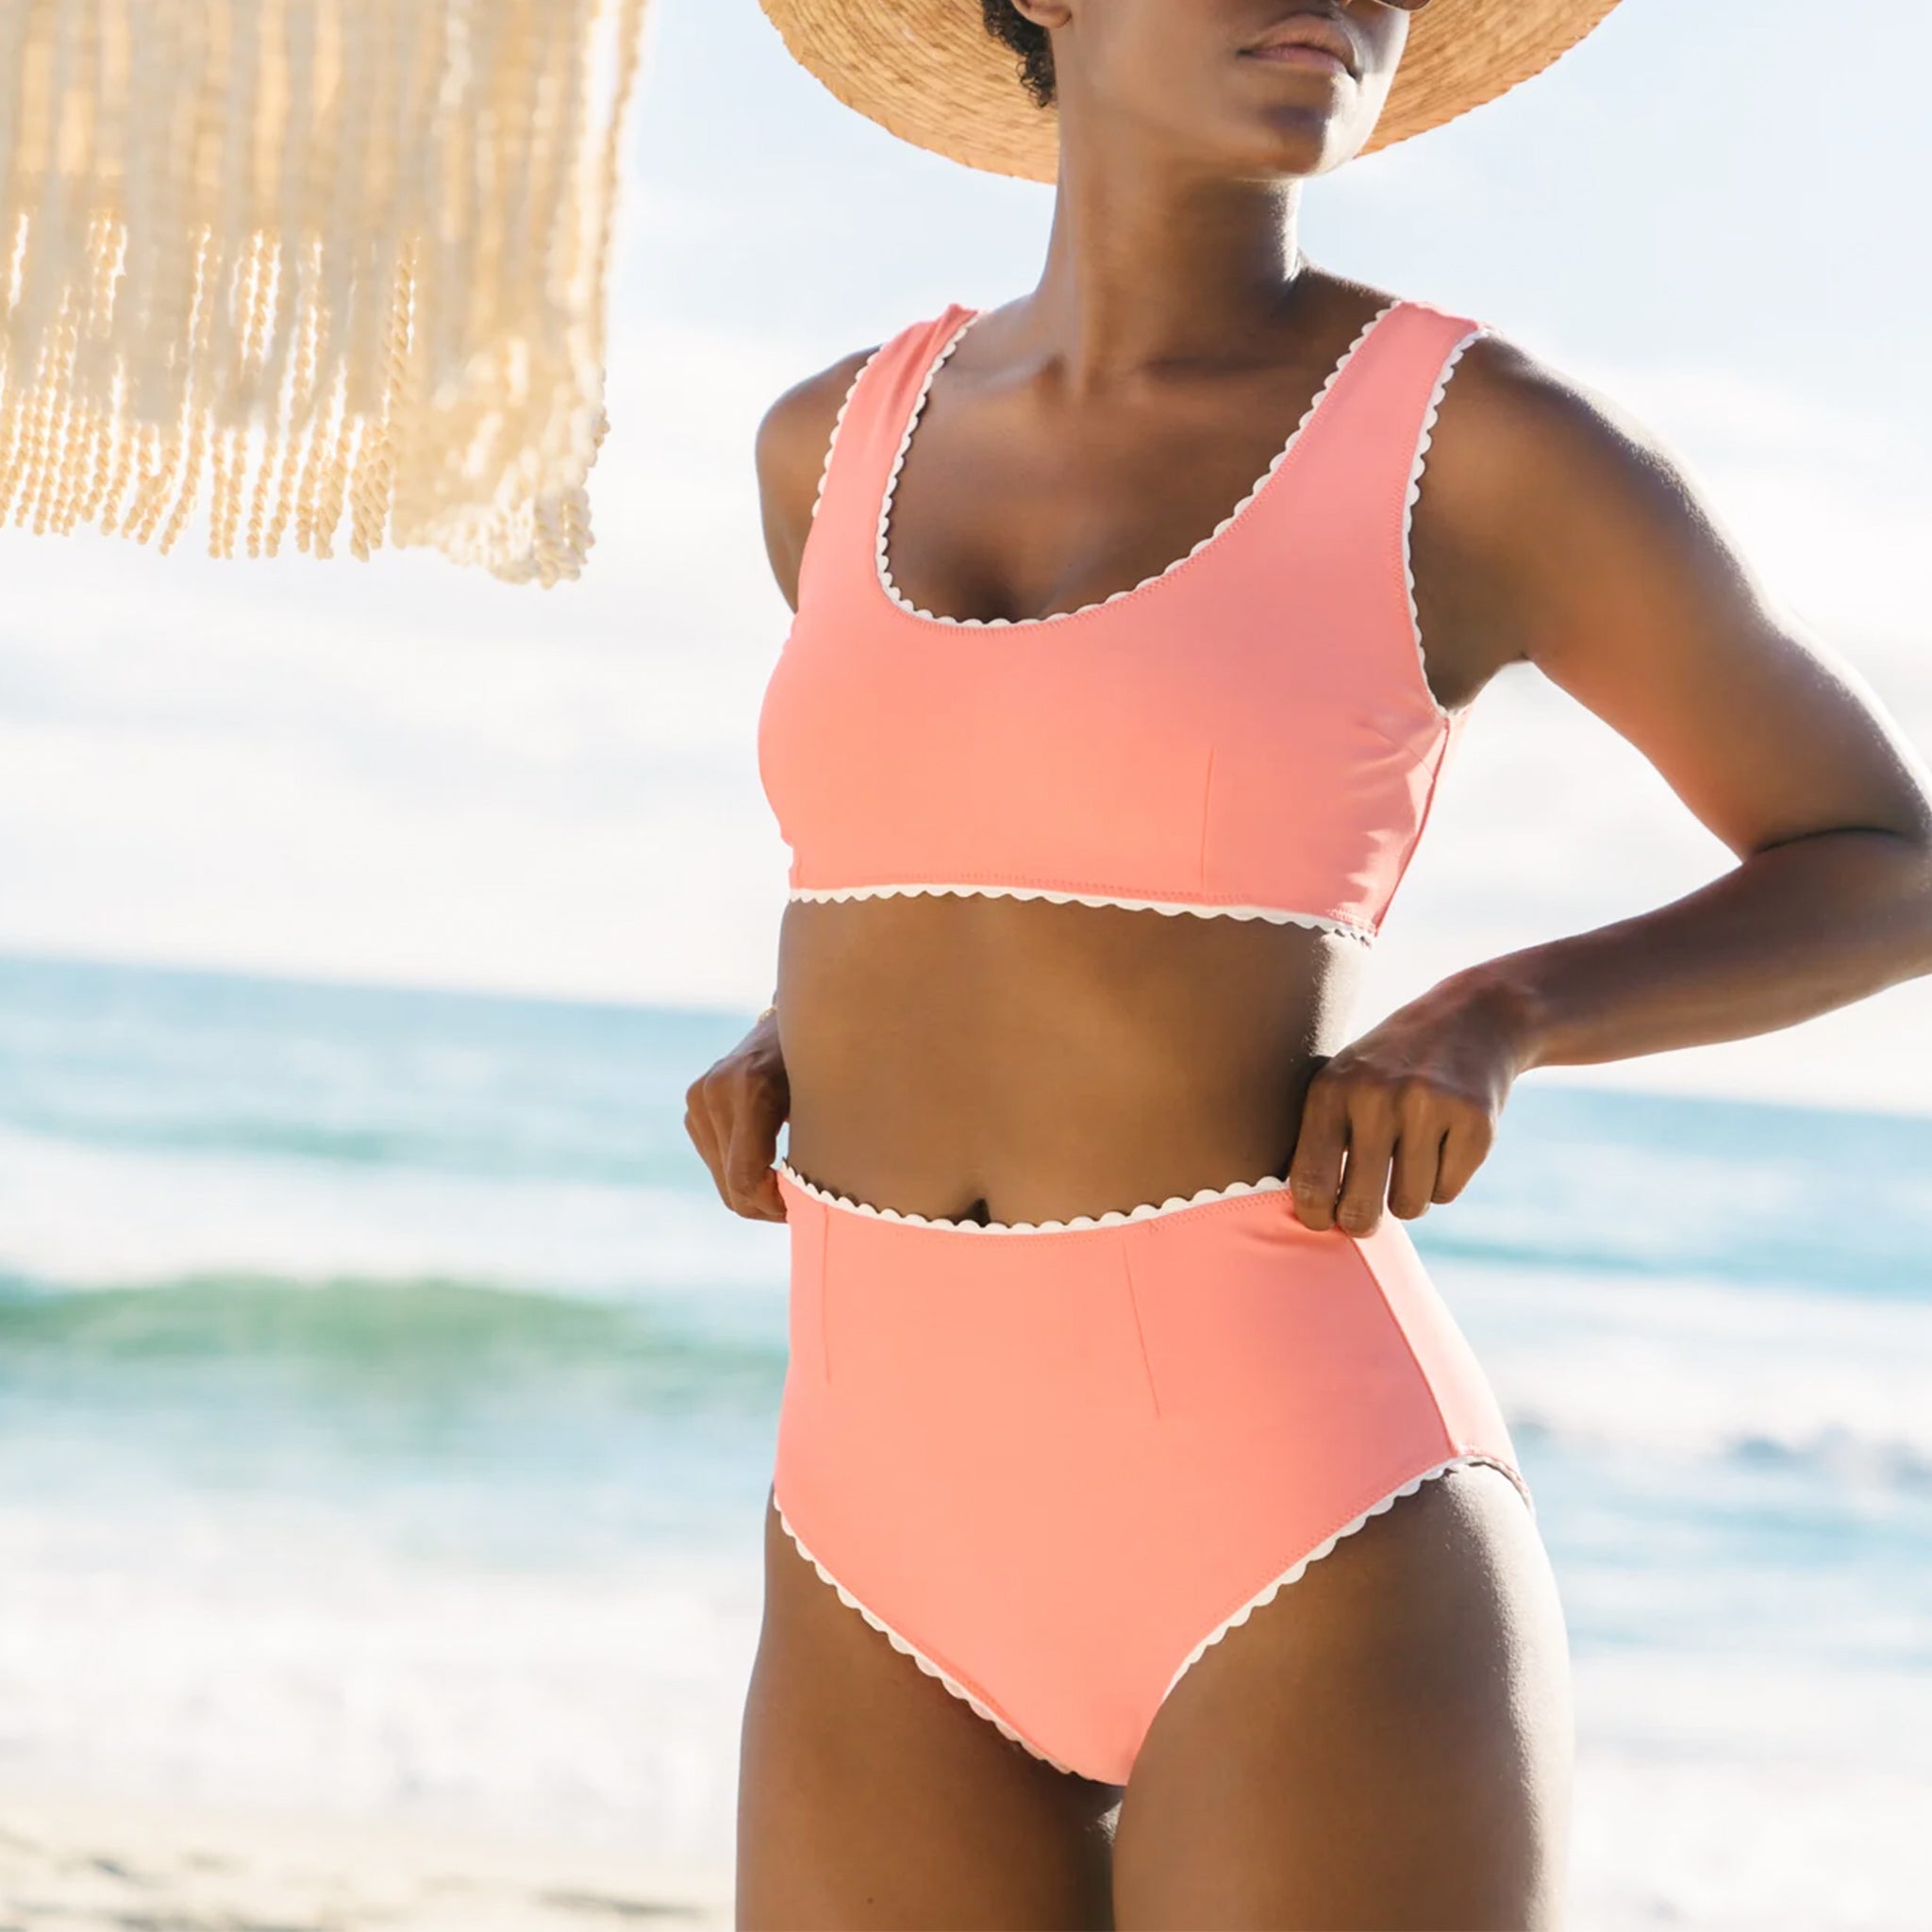 A model wearing a 1960's inspired swim suit with a wavy edge detail and high waist bottoms. The color of the swim suit is a coral pink hue.